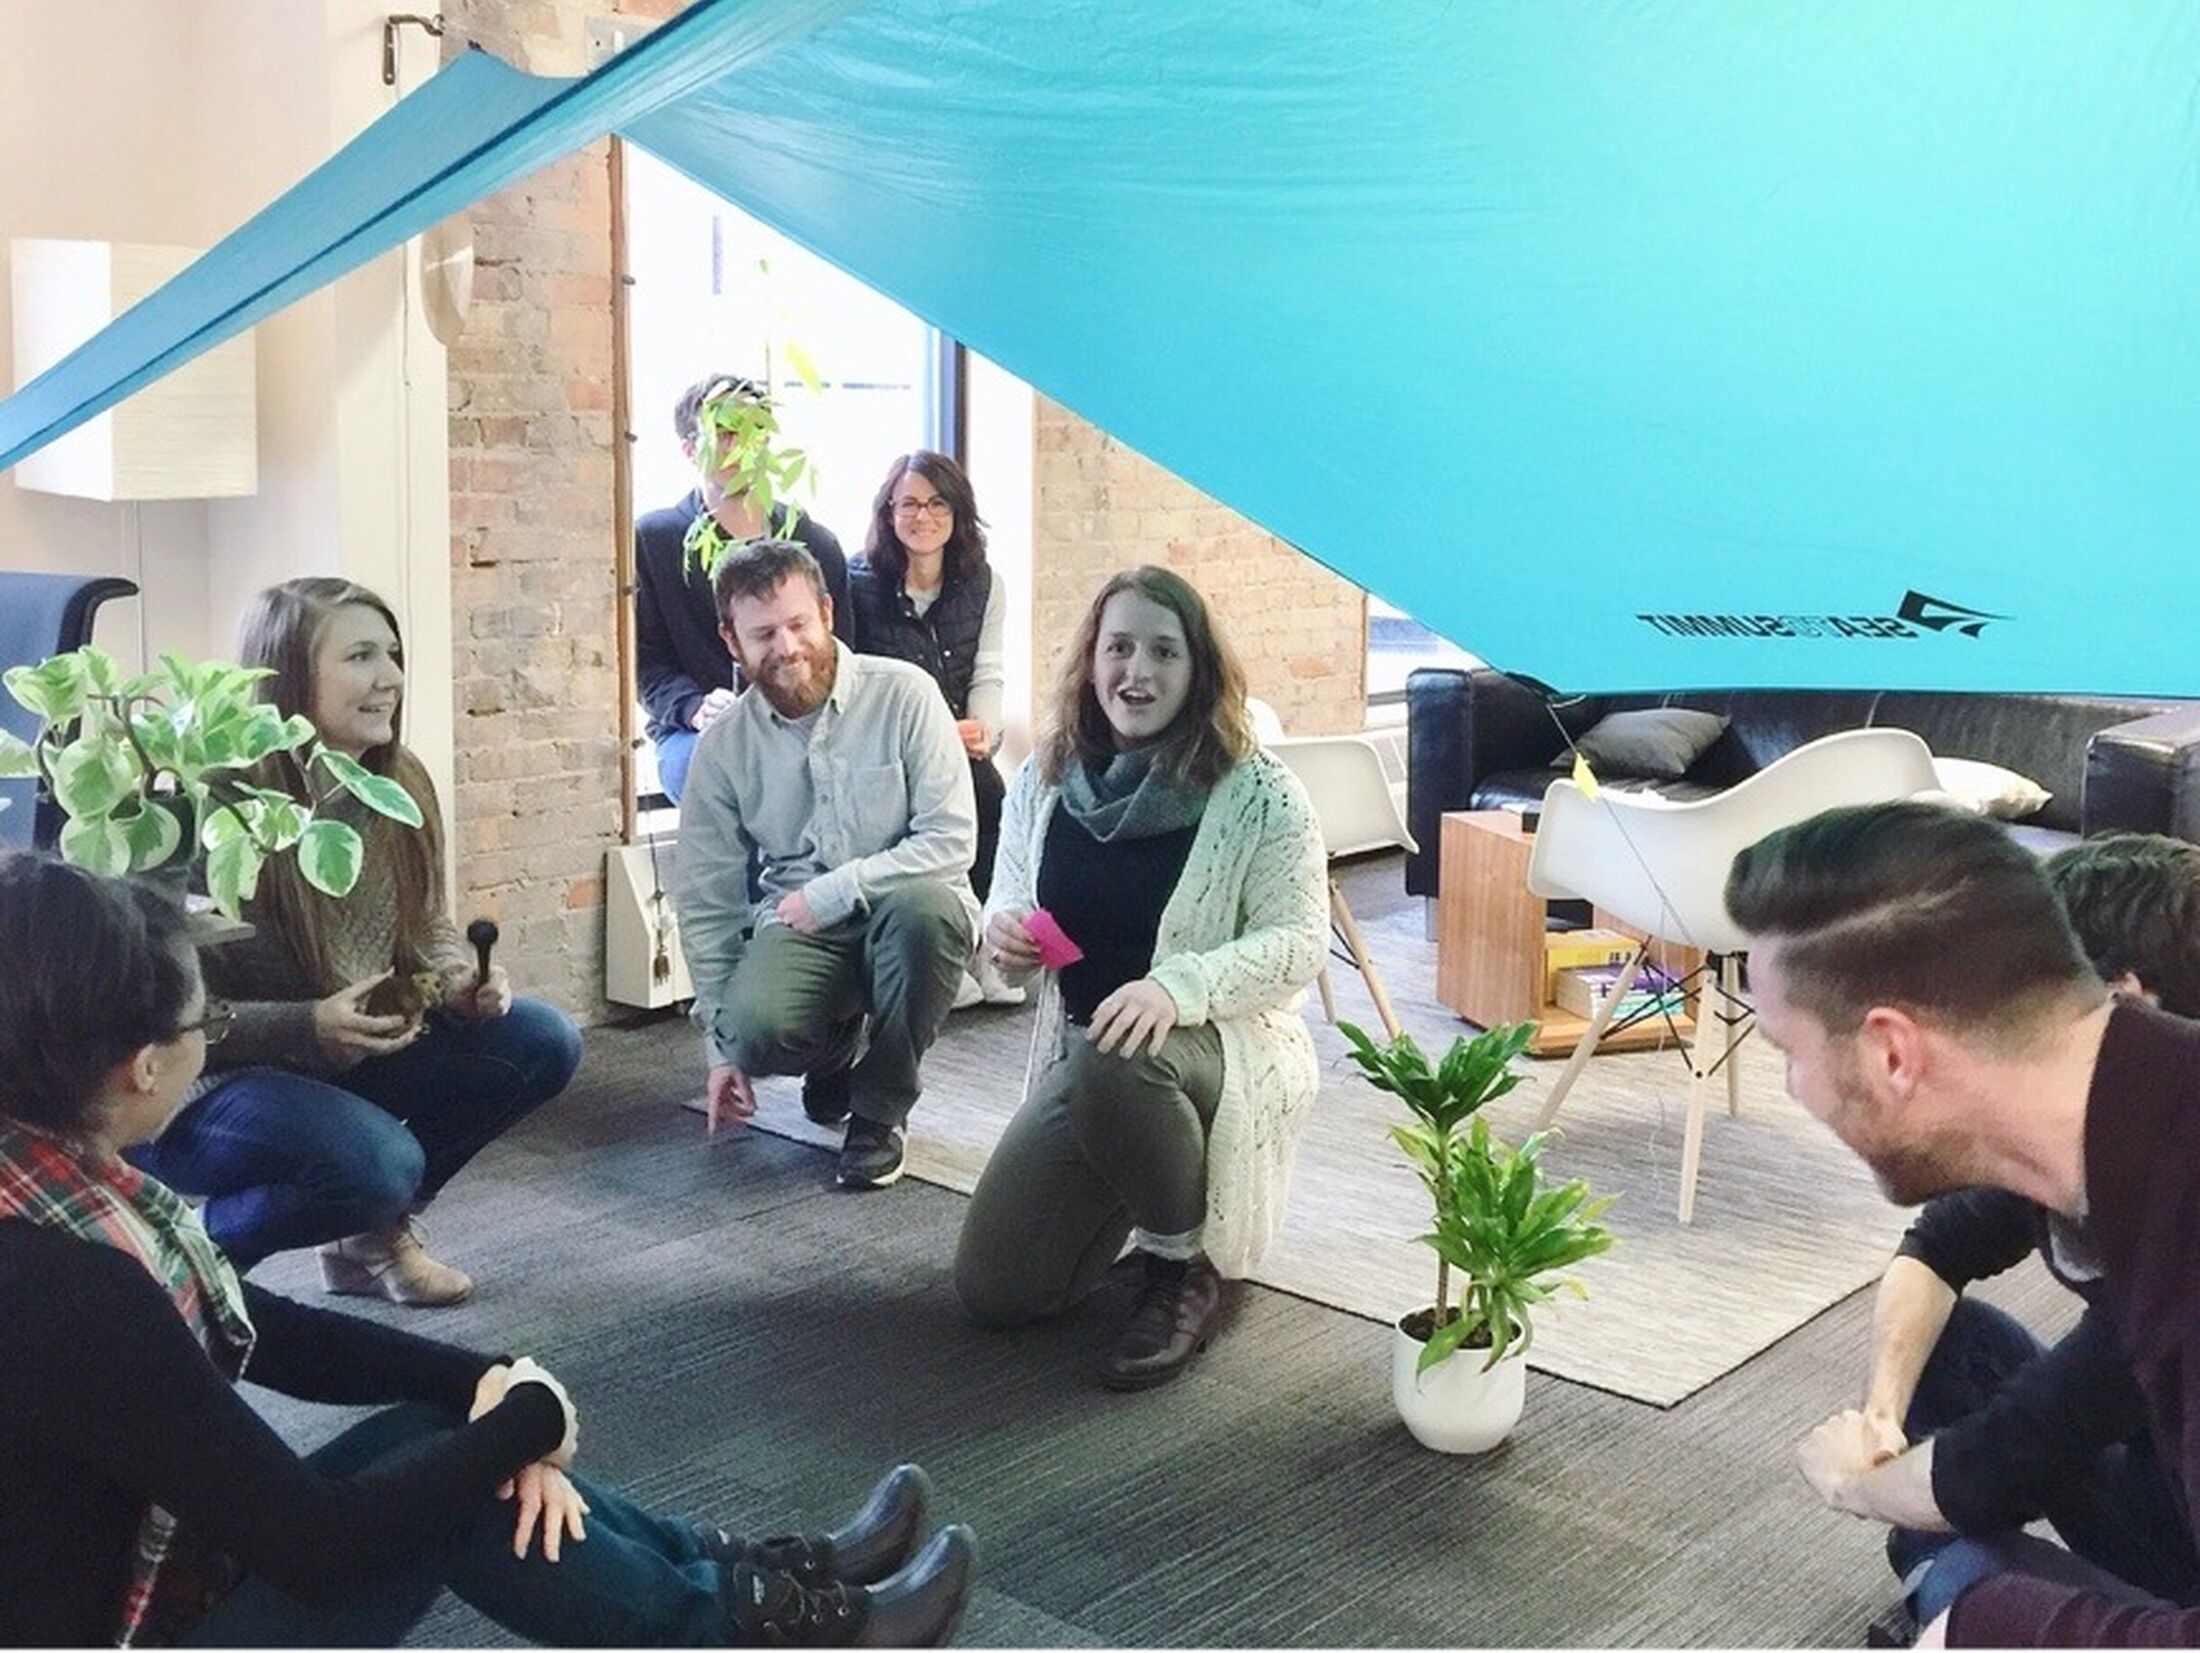 Picture of the Mighty team huddled under a tent pitched in the office